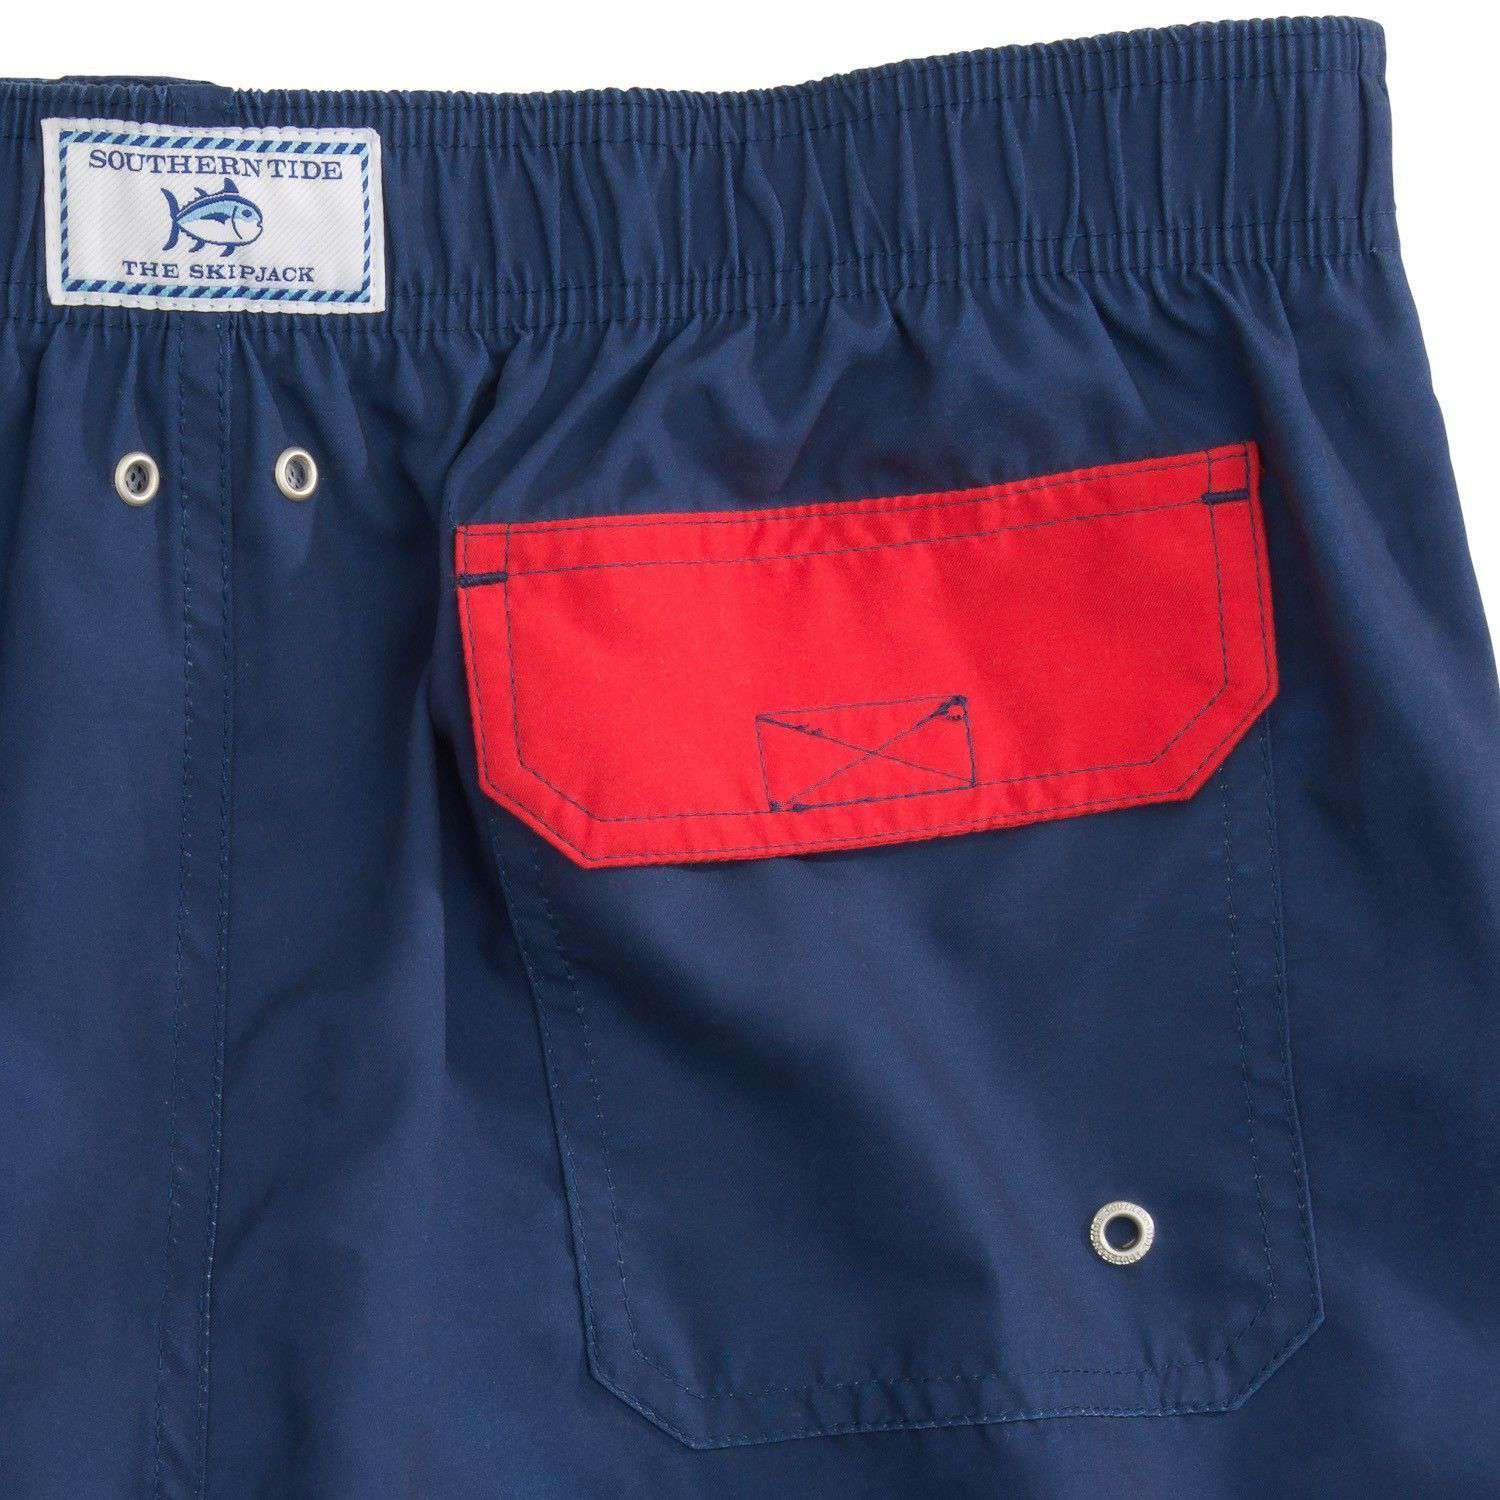 Hang Ten Swim Trunks in Yacht Blue by Southern Tide - Country Club Prep